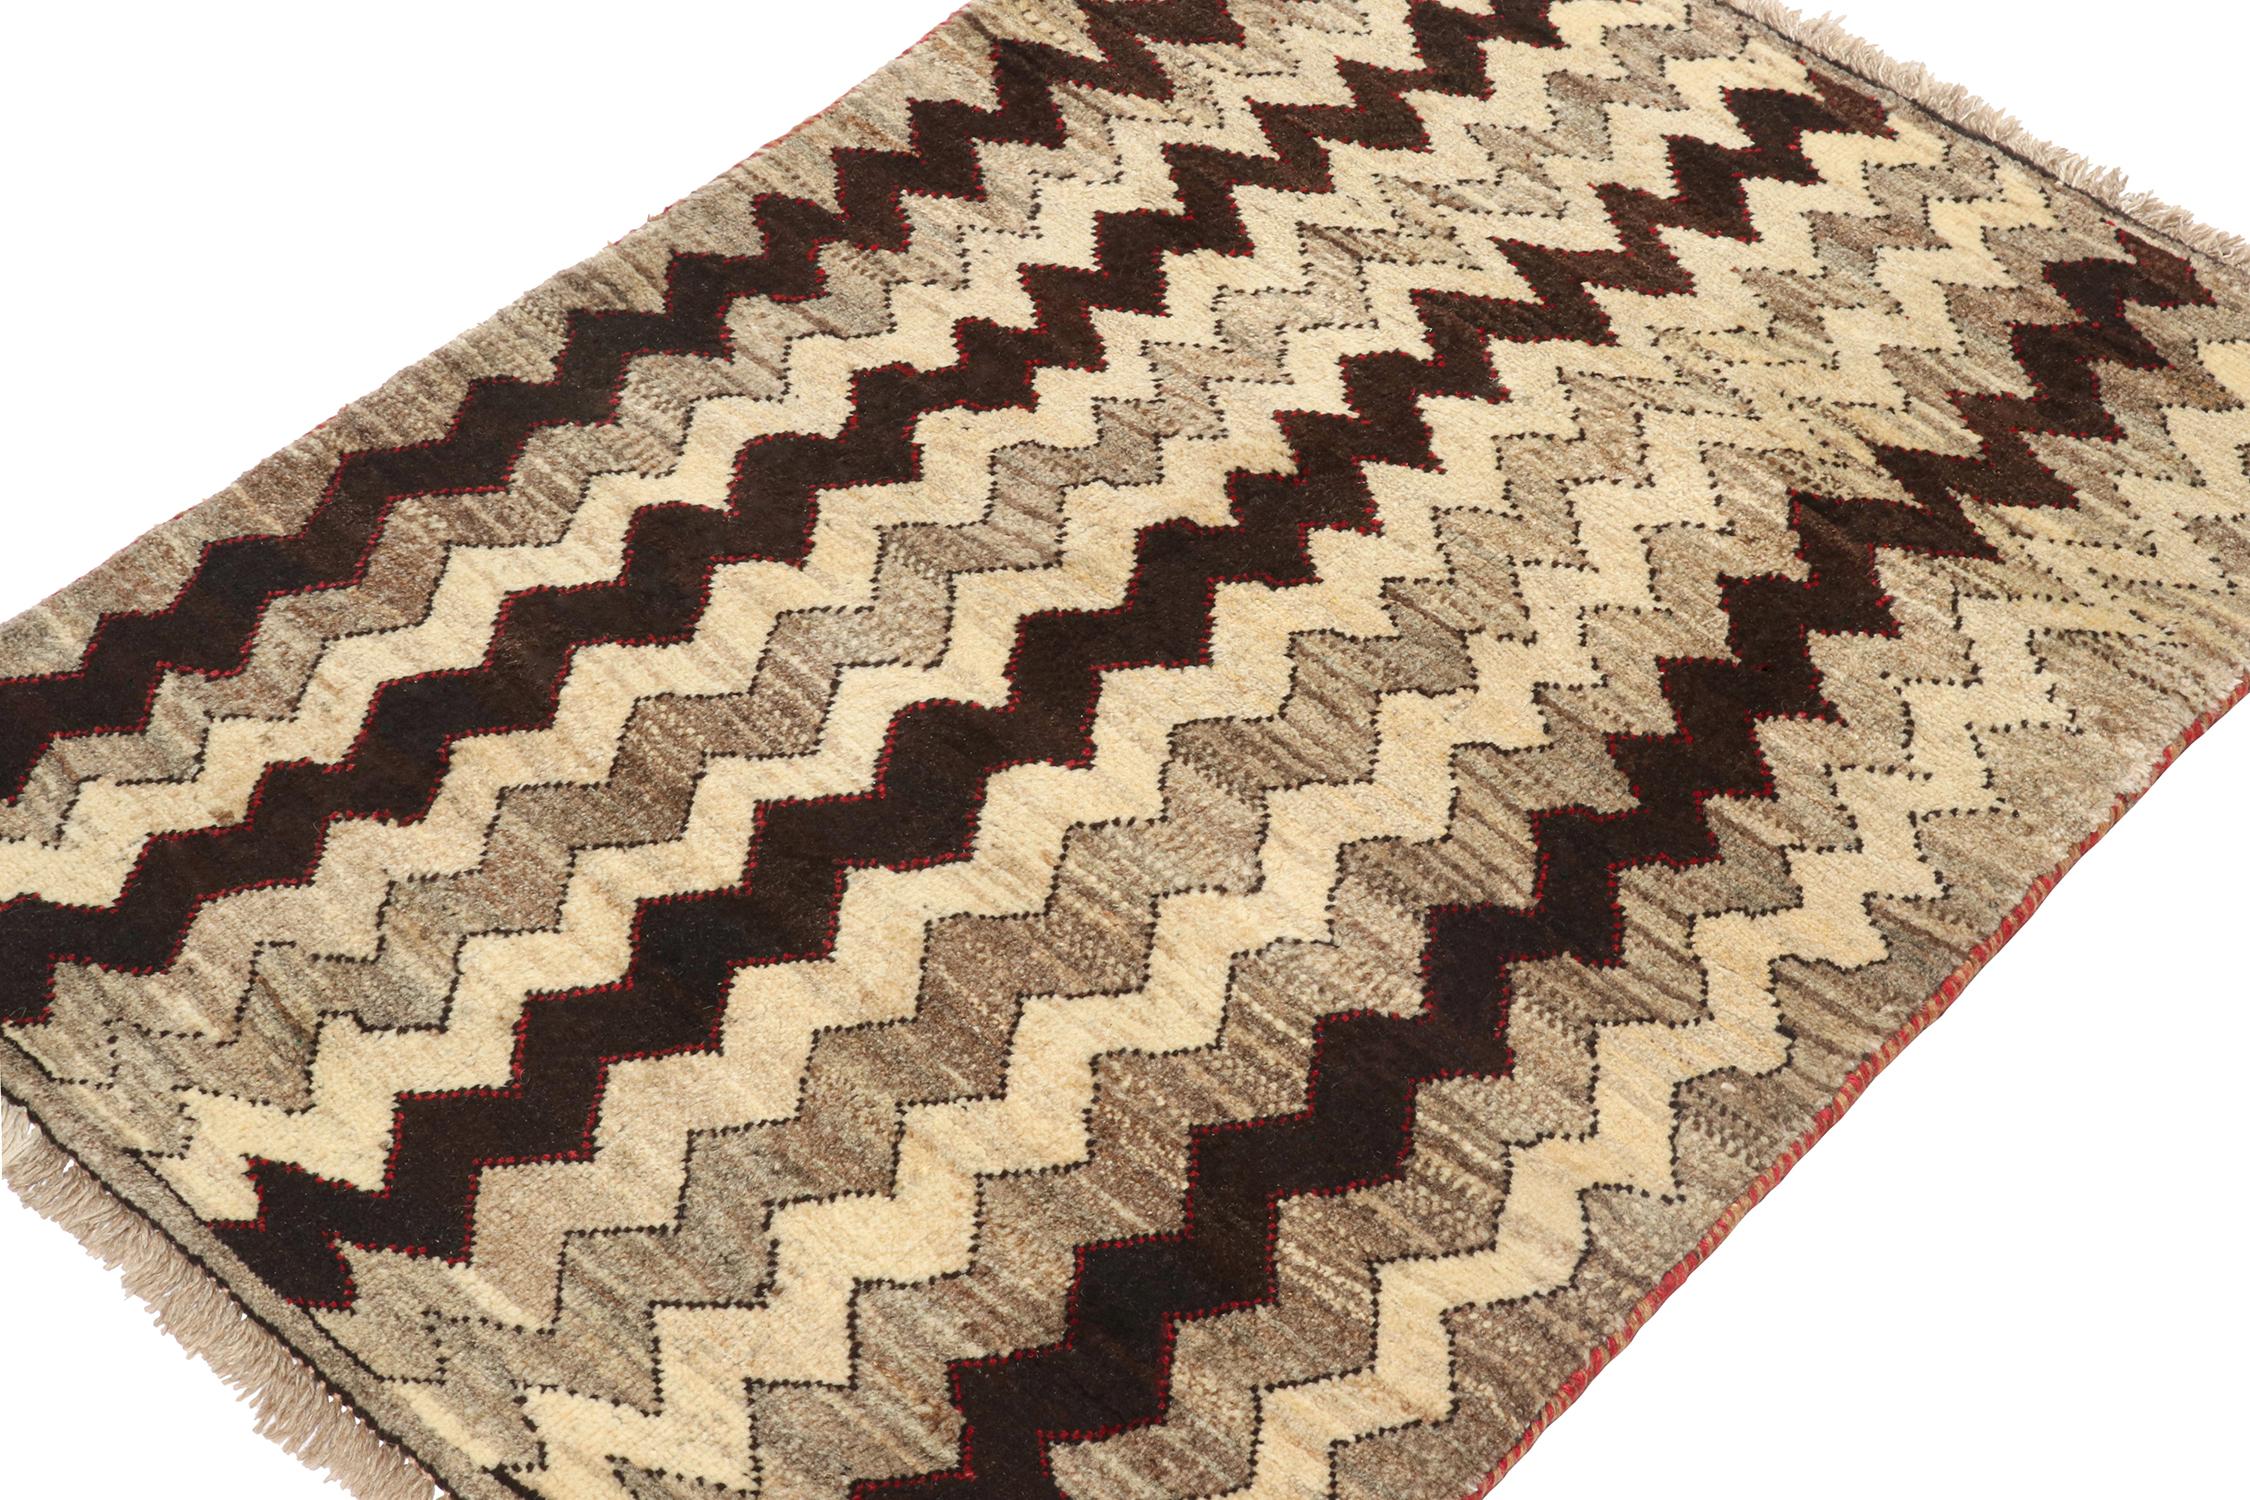 A vintage 3x4 Persian Gabbeh rug in the latest entries to Rug & Kilim’s curation of rare tribal pieces. Hand-knotted in wool circa 1950-1960.

On the Design:

This pattern enjoys chevrons in beige-brown and black, and keen eyes may admire red